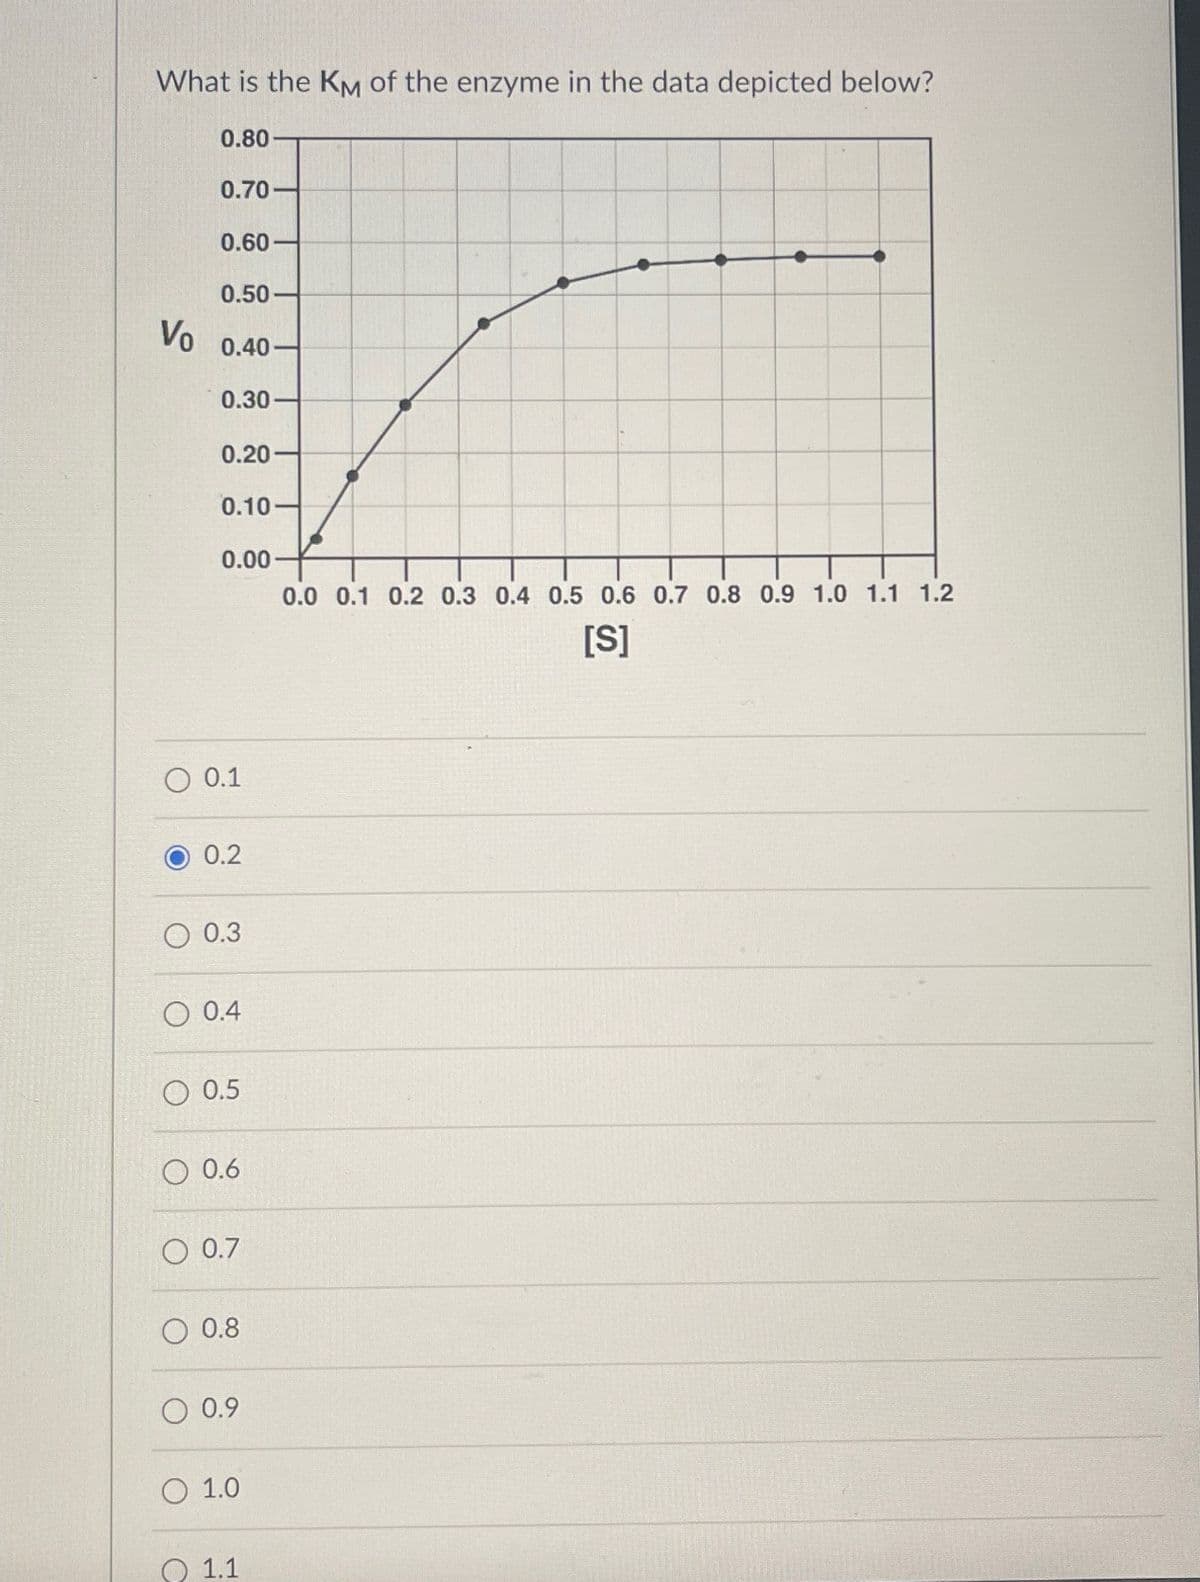 What is the KM of the enzyme in the data depicted below?
Vo
O
O
O
O
0.80
0.70-
0.60
0.50-
0.40-
0.30-
0.20
0.10-
0.00
0.1
0.2
0.3
0.4
0.5
0.6
0.7
0.8
0.9
1.0
1.1
0.0 0.1 0.2 0.3 0.4 0.5 0.6 0.7 0.8 0.9 1.0 1.1 1.2
[S]